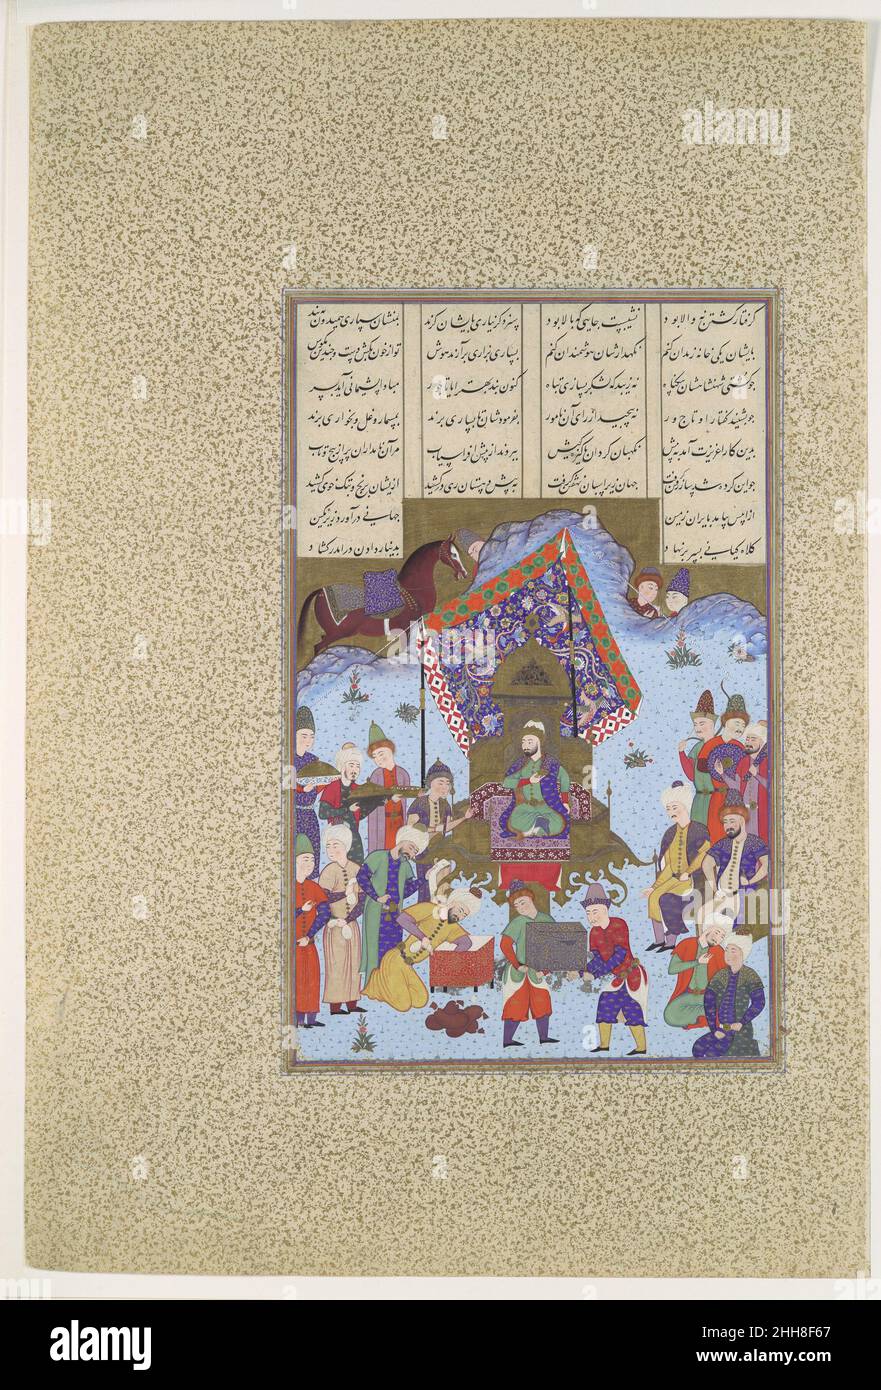 'Afrasiyab on the Iranian Throne', Folio 105r from the Shahnama (Book of Kings) of Shah Tahmasp ca. 1525–30 Abu'l Qasim Firdausi Back in Dahistan the Turanians defeat the Iranians and take Shah Nauzar prisoner. With news of the Turanian rout in Zabul, Afrasiyab pillories Nauzar and beheads him. The Turanians march across Iran, and Afrasiyab sits on the throne. With this victory come the vast riches of the Iranian treasury, which servants parade before him. One year later famine descends on Iran and Turan, and the two enemies are forced to agree to an armistice.. 'Afrasiyab on the Iranian Thron Stock Photo